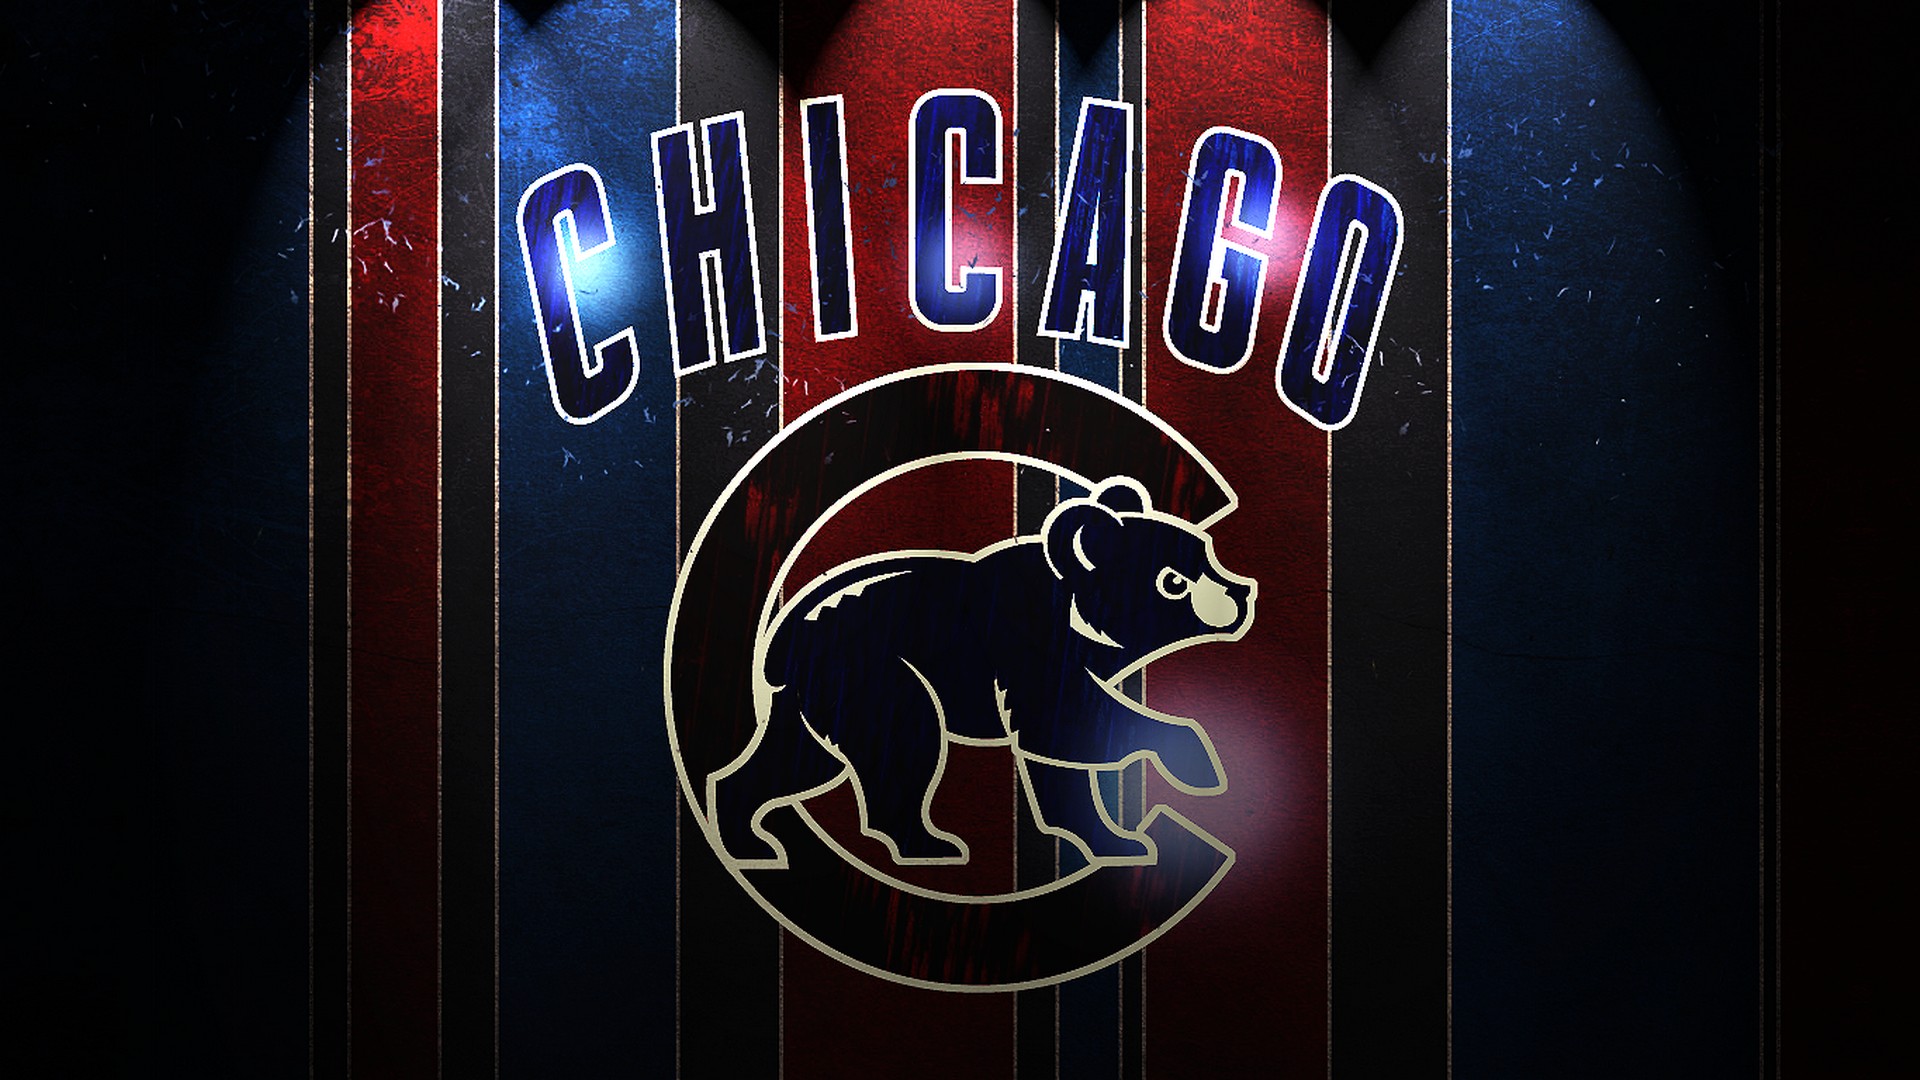 Chicago Cubs MLB Wallpaper With high-resolution 1920X1080 pixel. You can use this wallpaper for Mac Desktop Wallpaper, Laptop Screensavers, Android Wallpapers, Tablet or iPhone Home Screen and another mobile phone device